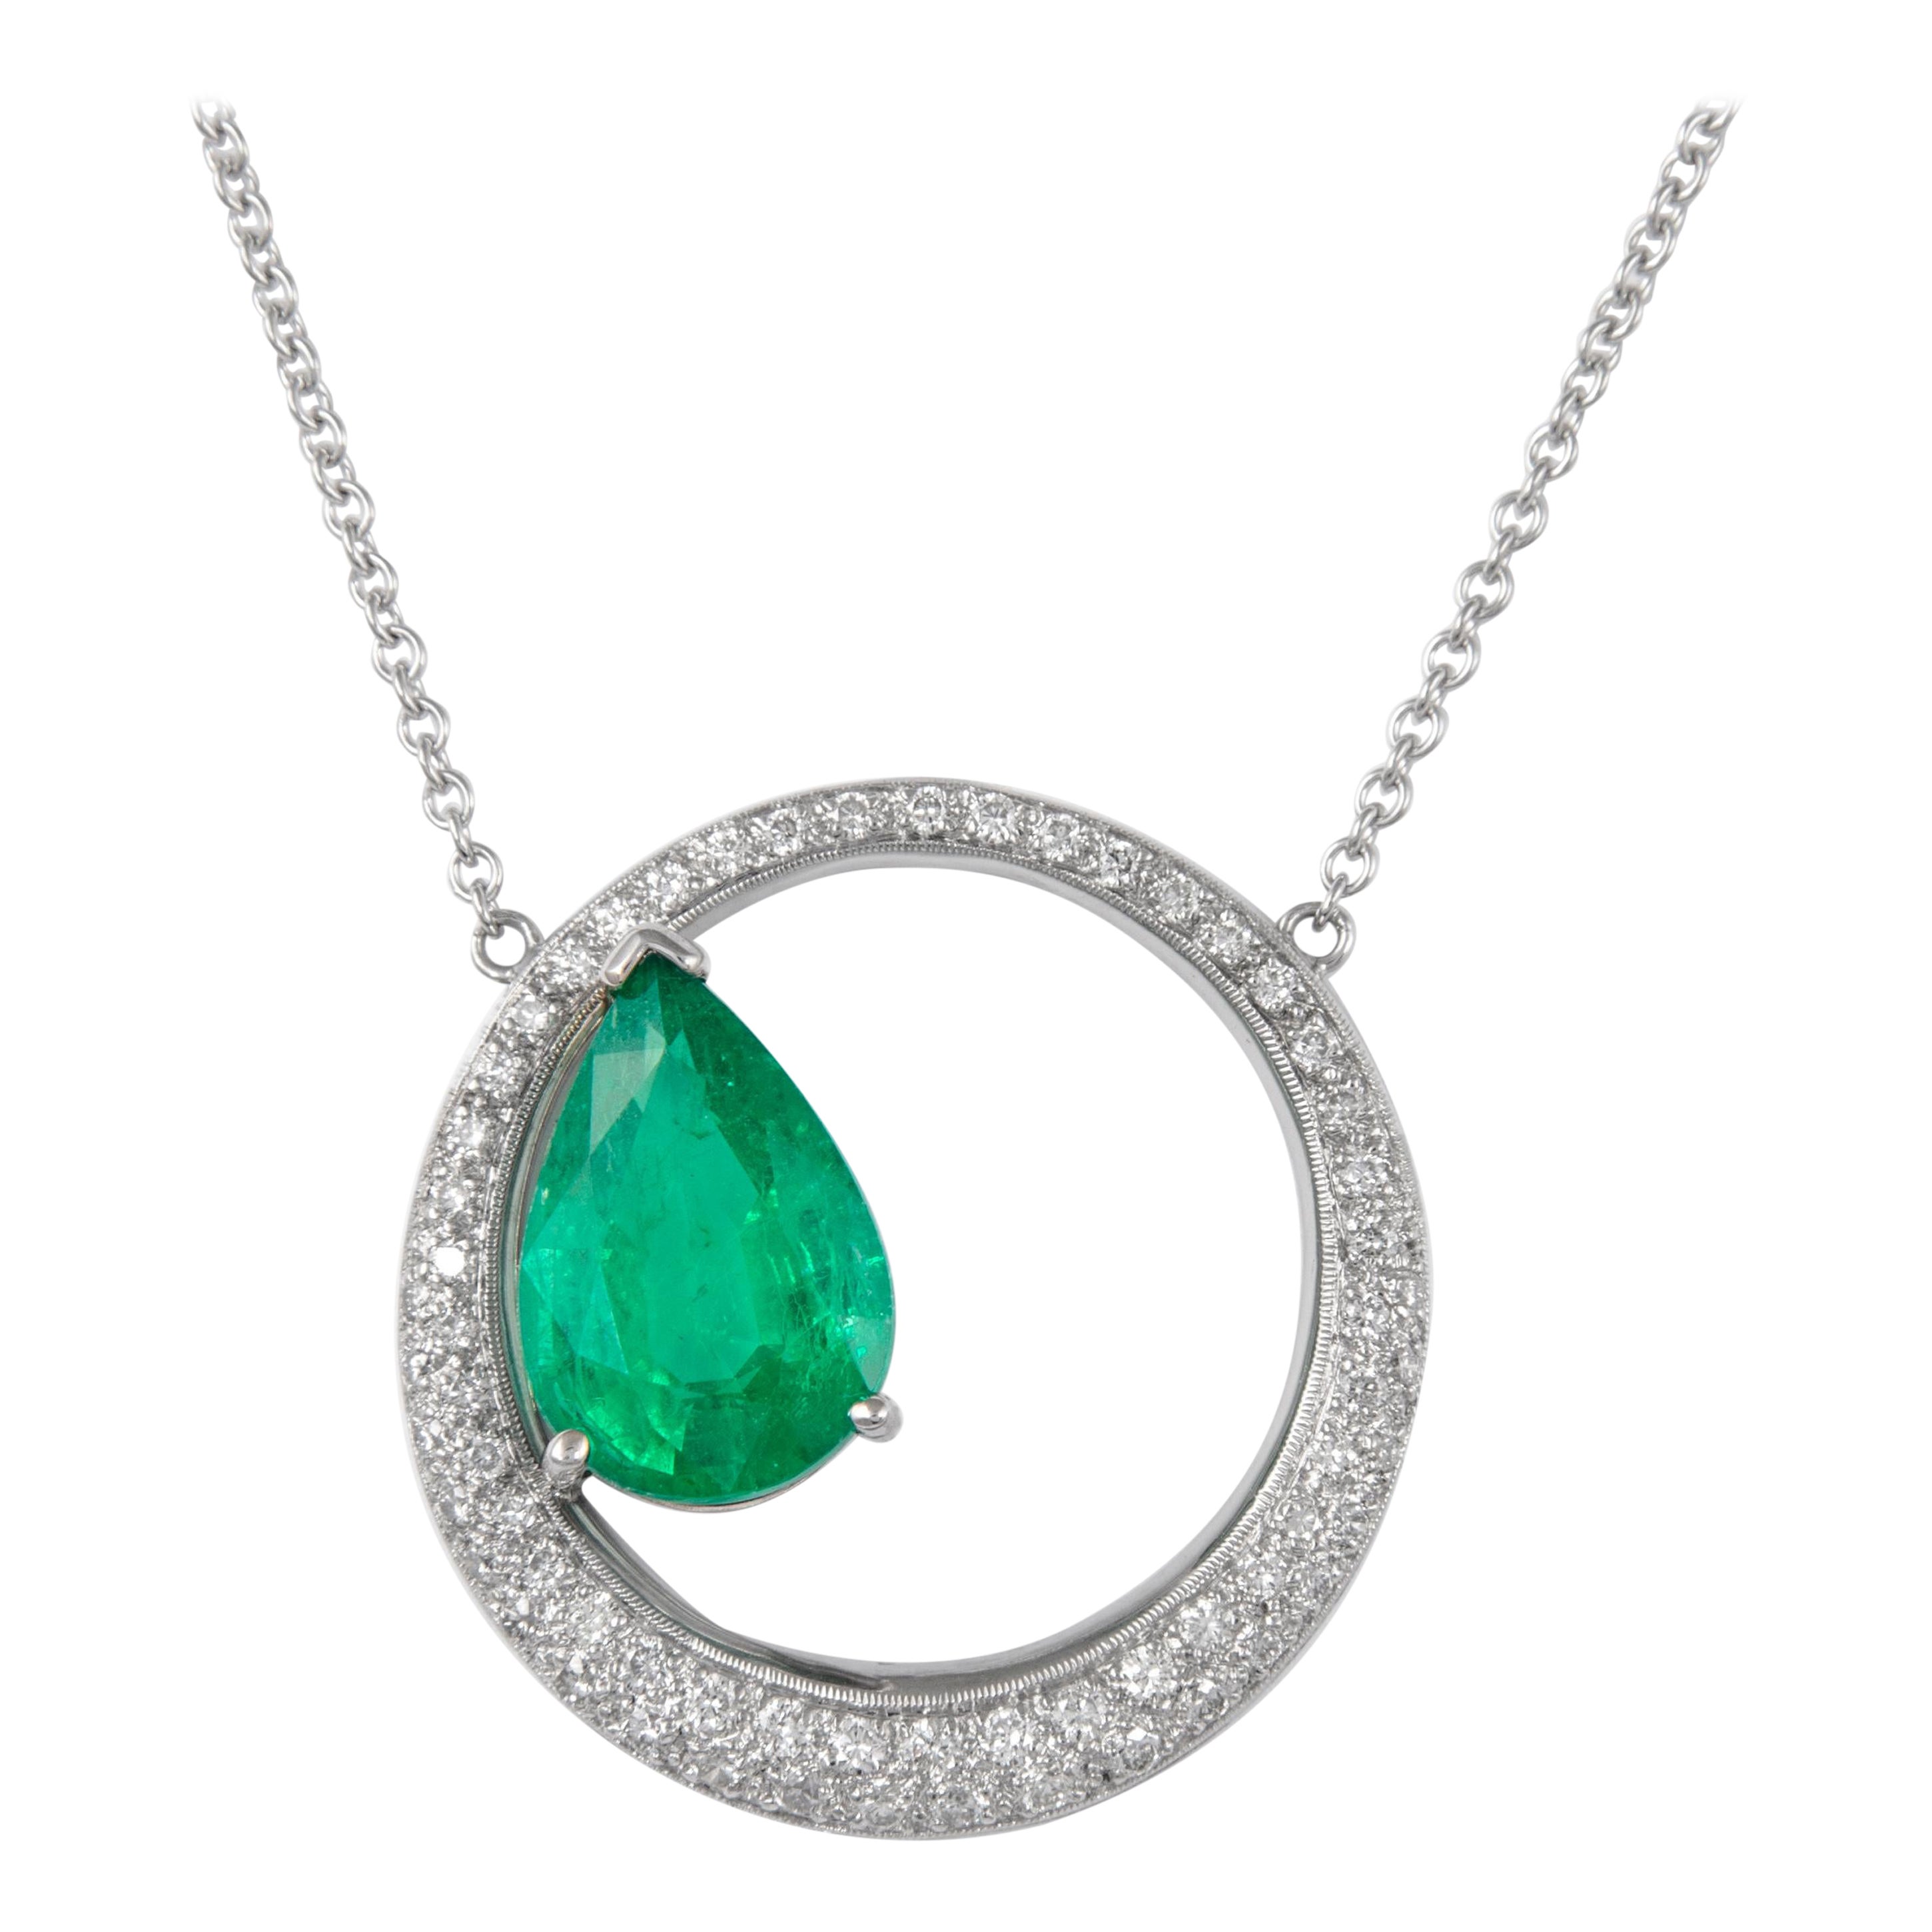 Alexander 4.56ct Emerald with Pave Diamond 18k White Gold Pendant Necklace